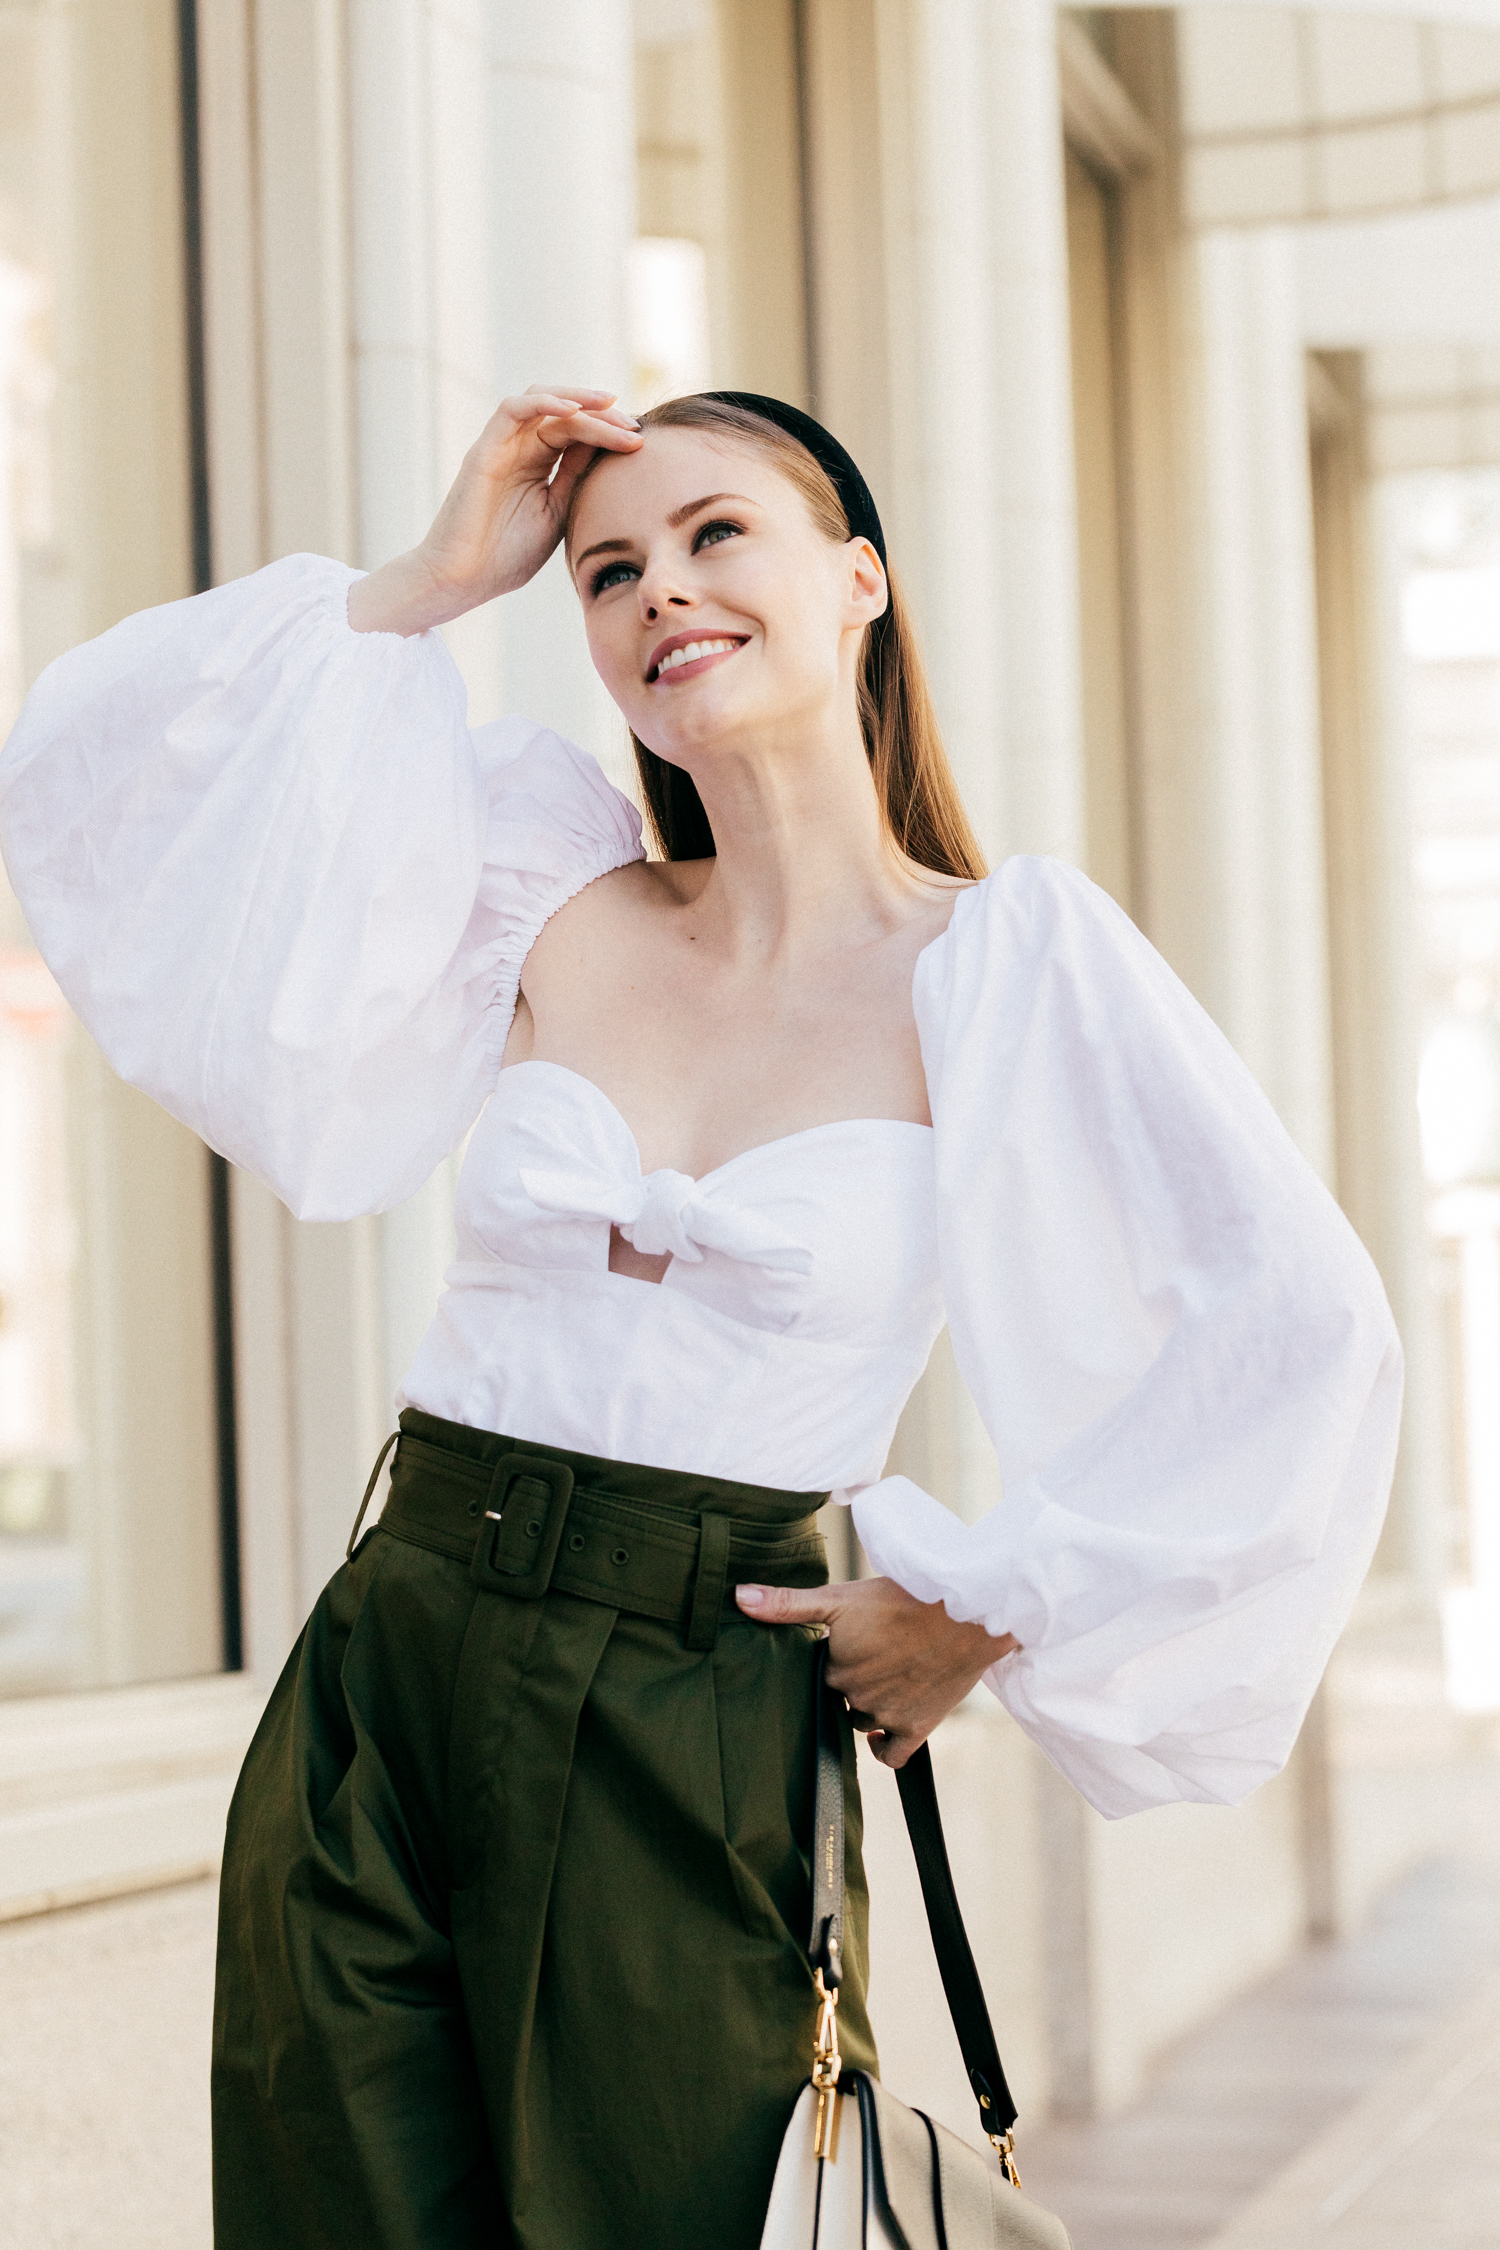 Alyssa Campanella of The A List blog shares her summer makeup favorites wearing Attico billowing sleeve top and Dior beauty eyeshadow palette